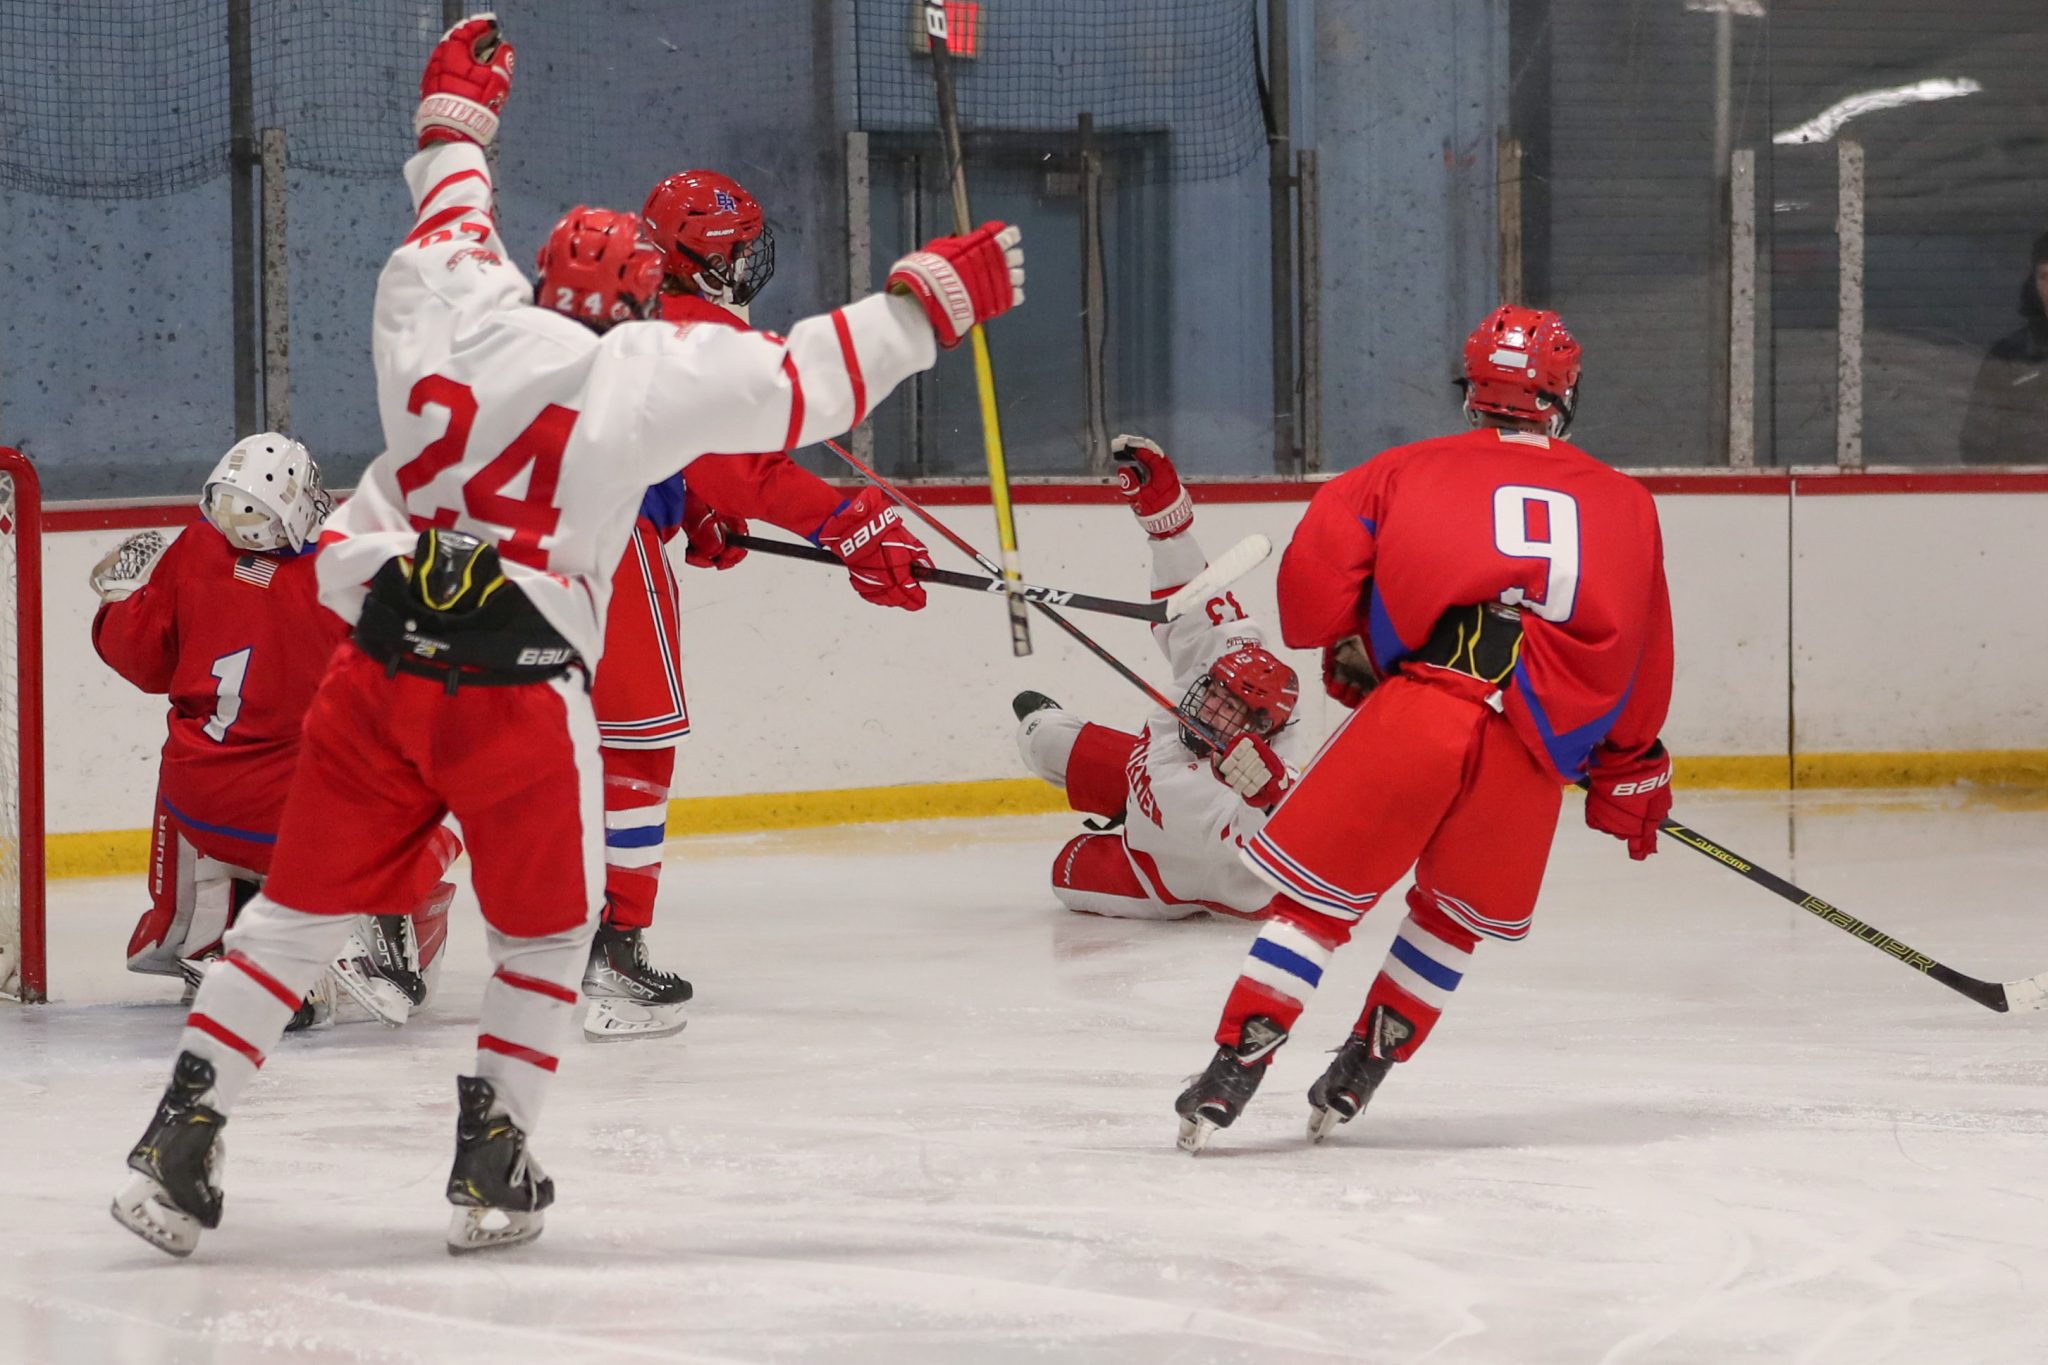 Senior Alex Barzowskas scores from his knees and slides into the boards to give Hingham the 2-0 lead in the third. 